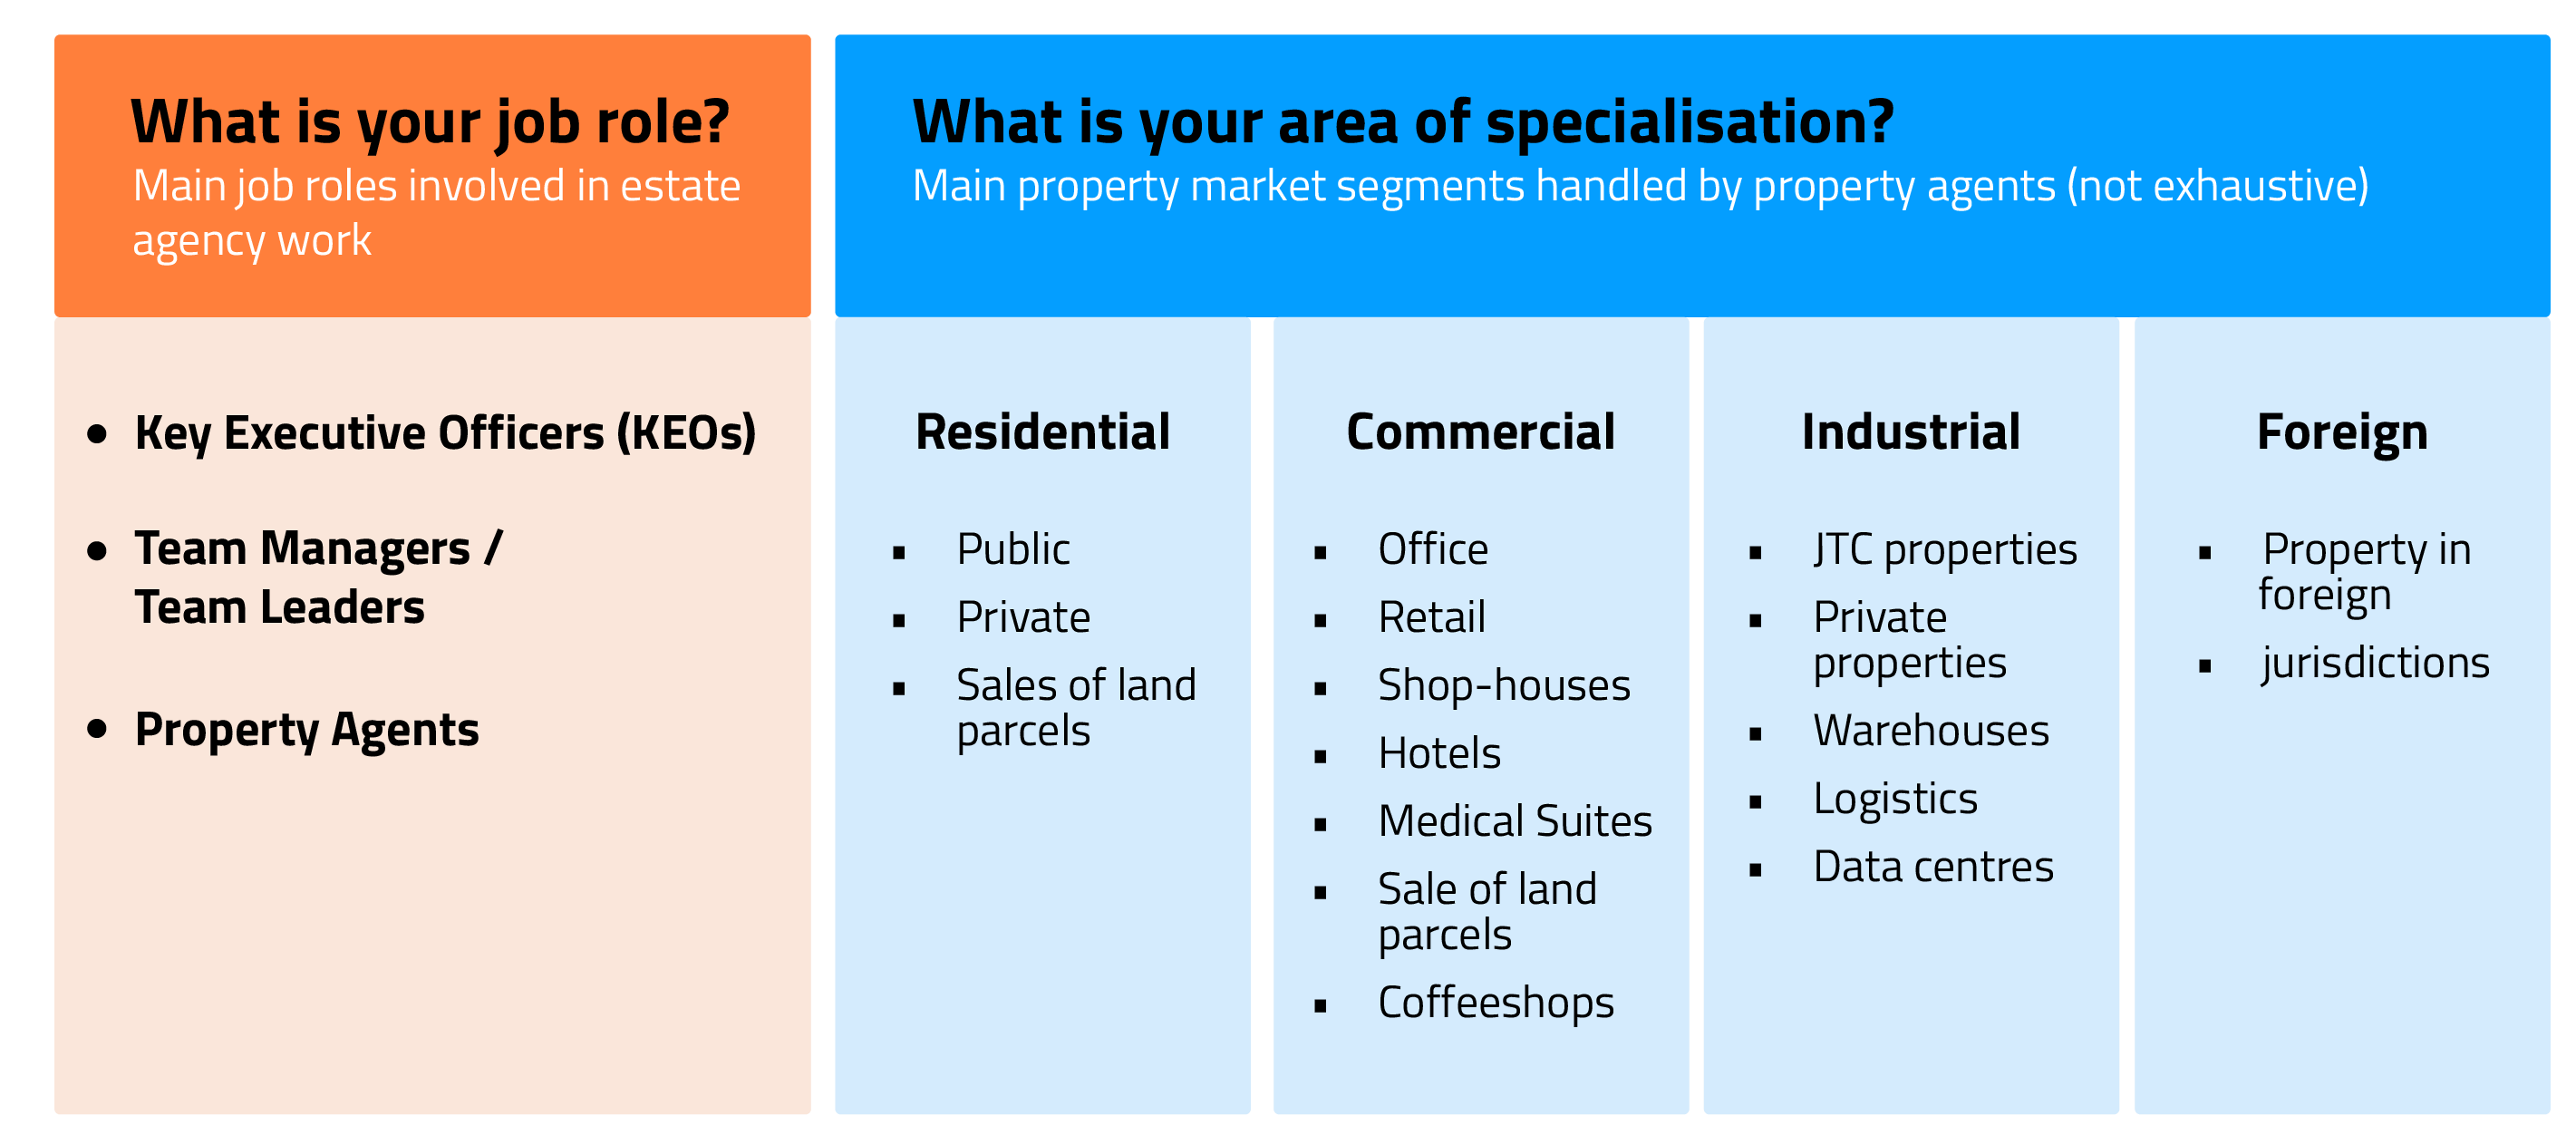 Your role and area of specialisation